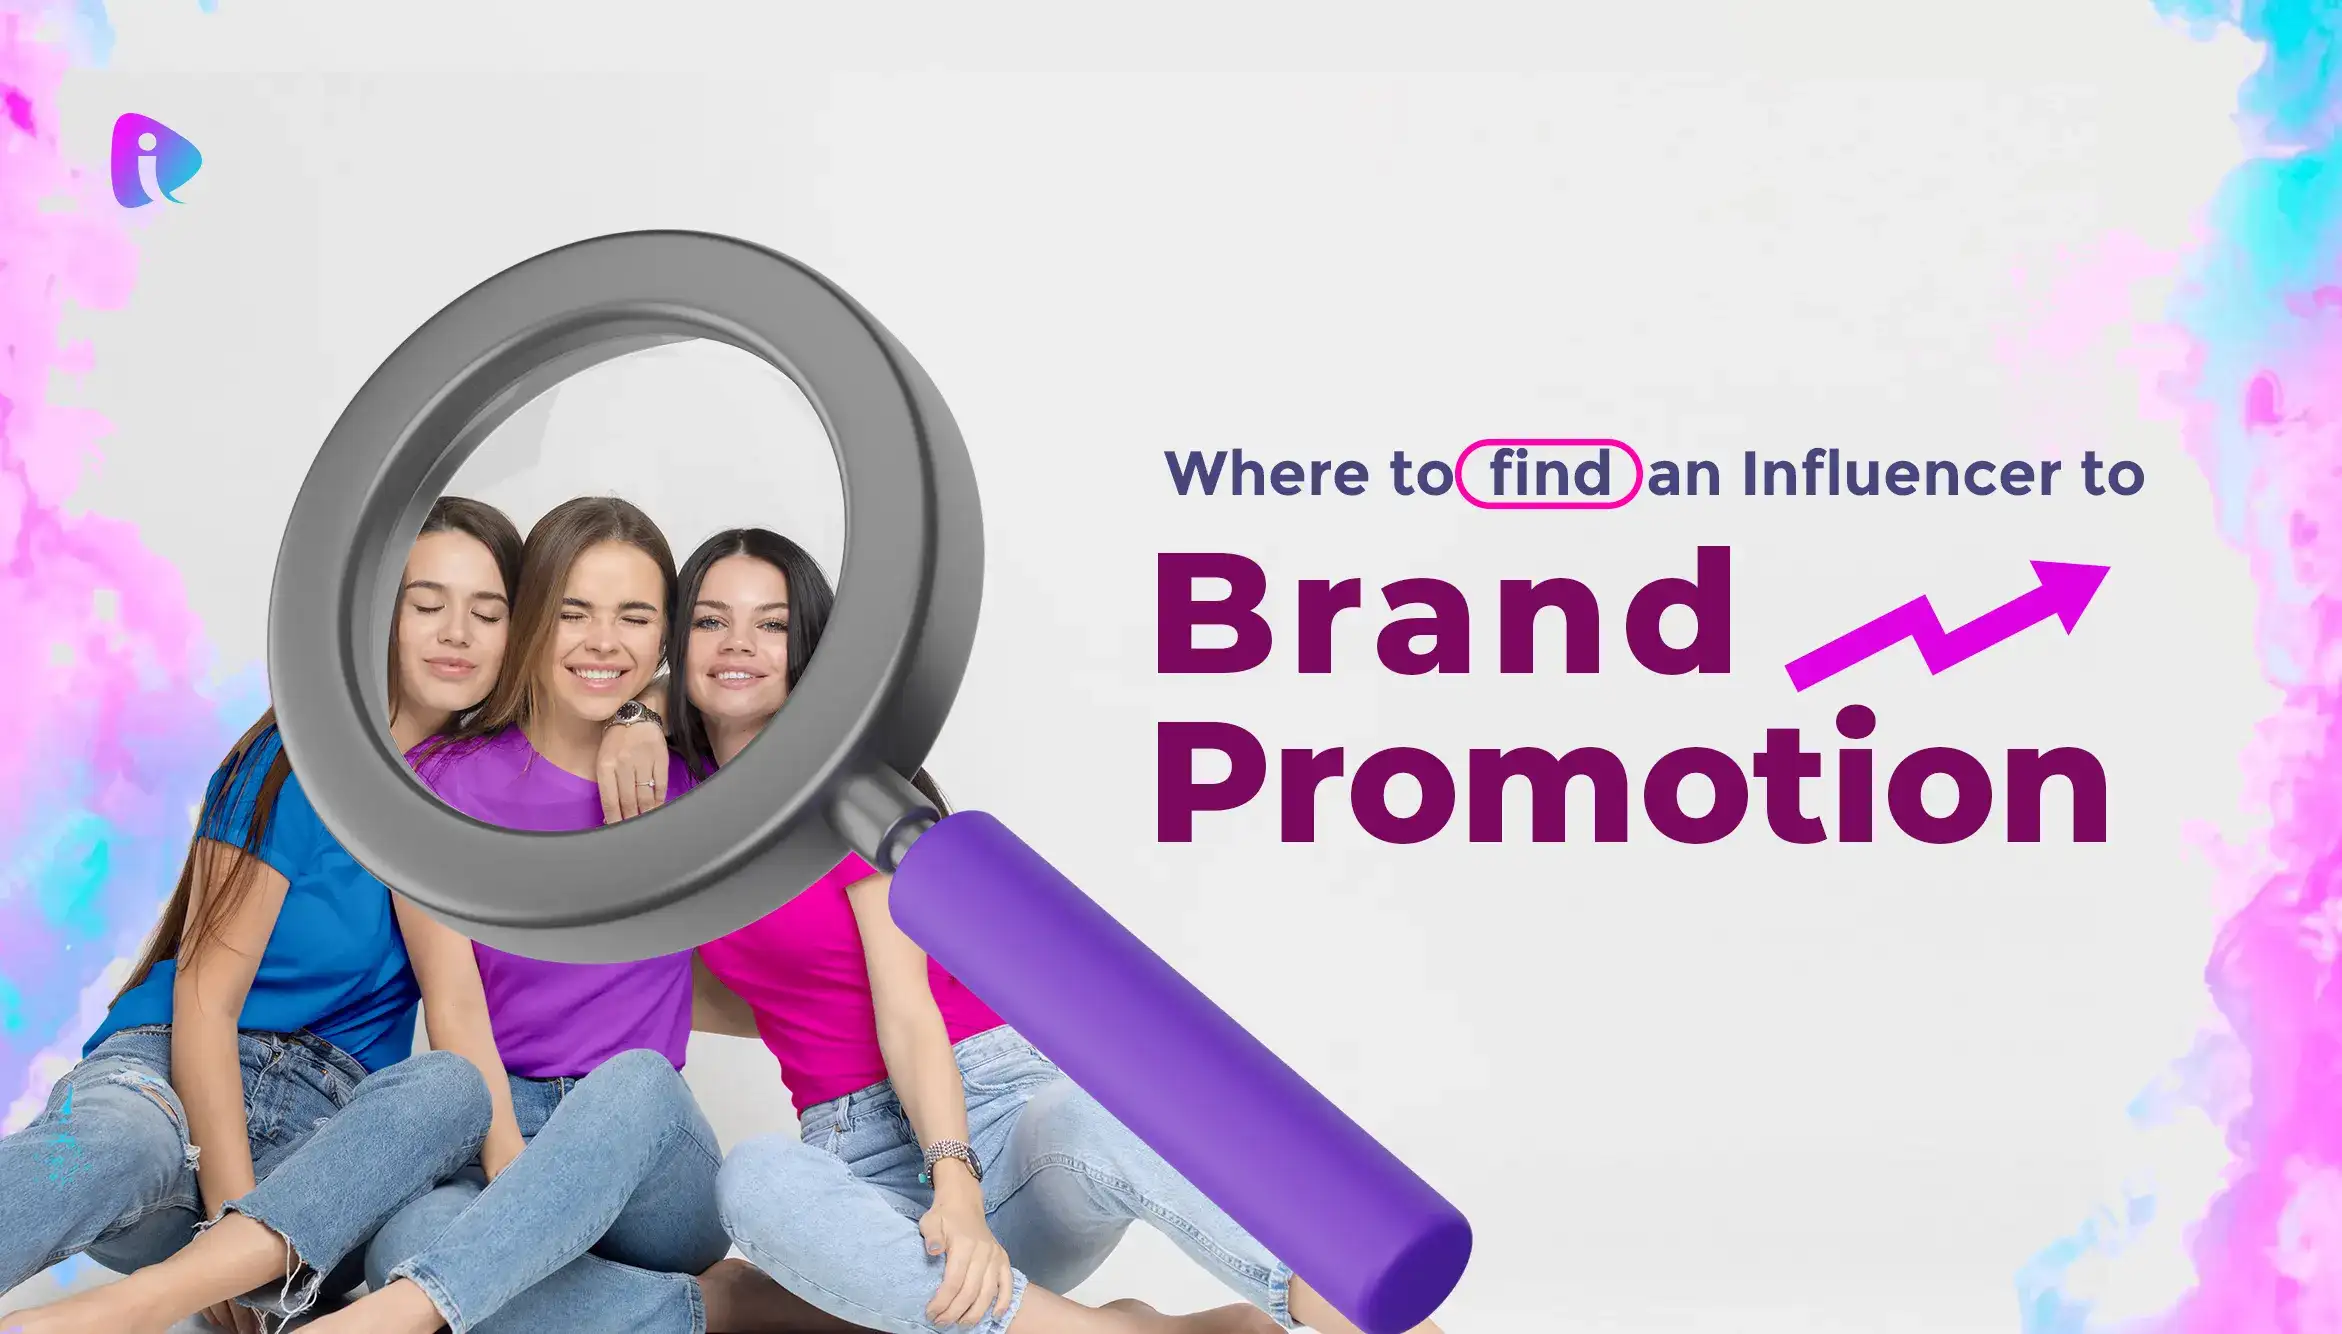 006_where_to_find_an_influencer_to_brand_promotion_s.webp